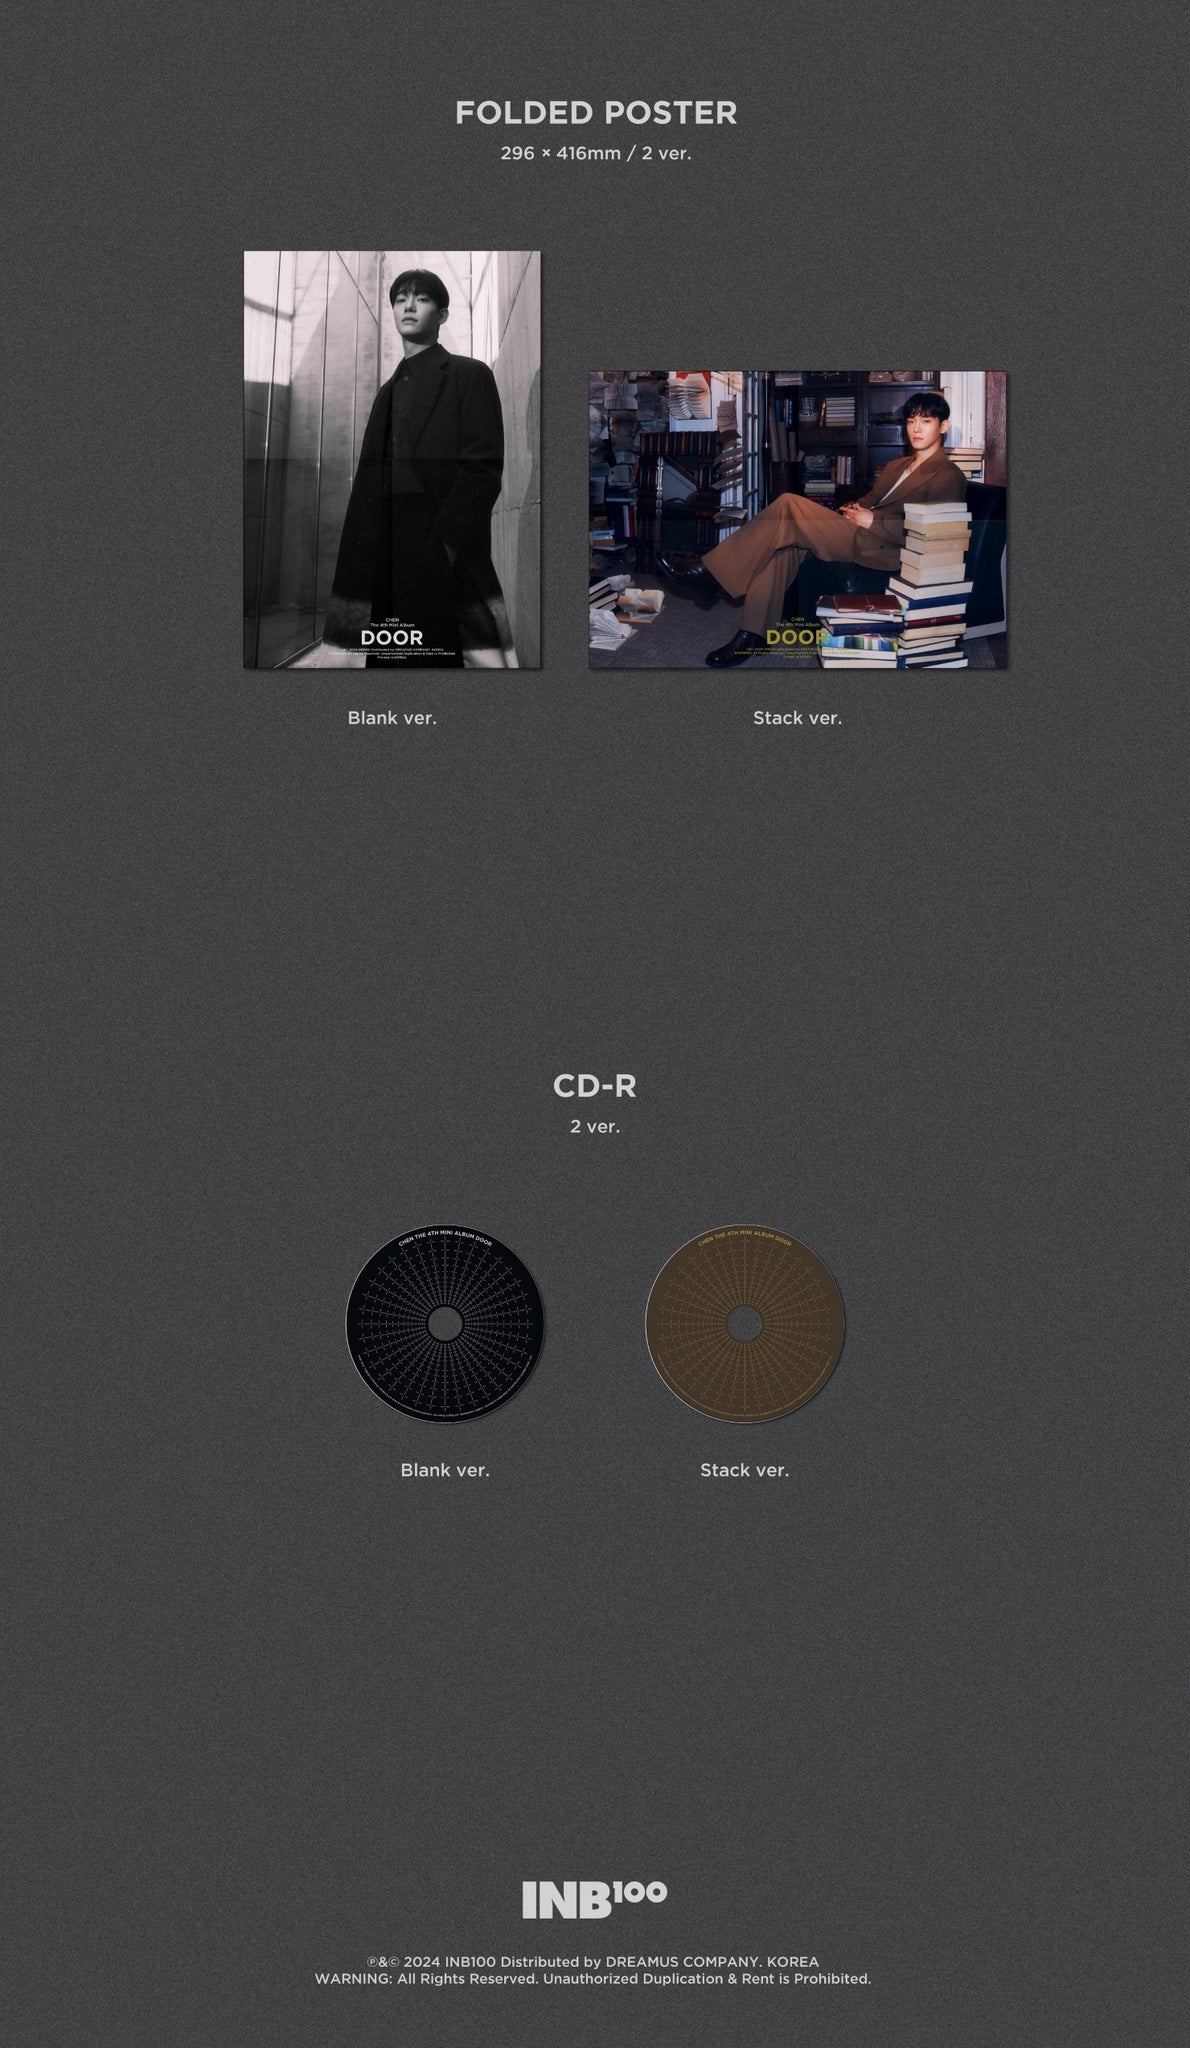 Chen (EXO) 4th Mini Album DOOR - Blank / Stack Version Inclusions: Folded Poster, CD